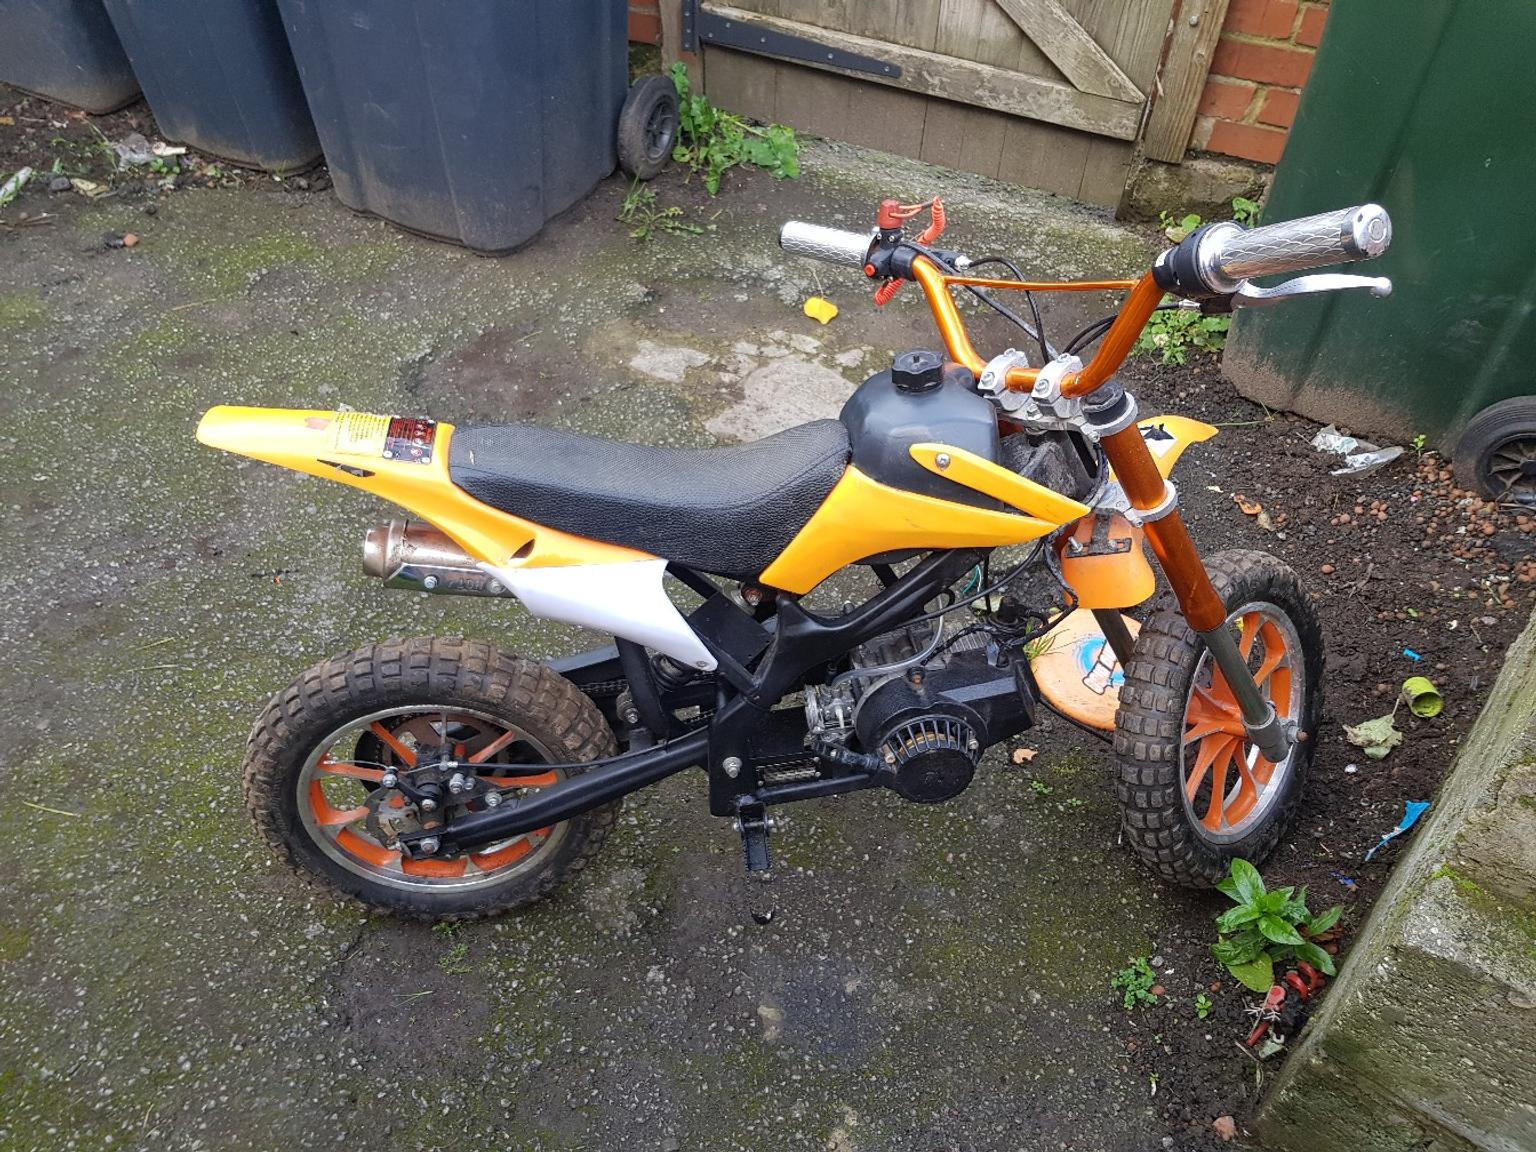 mini moto 50cc in S66 Rotherham for £130.00 for sale | Shpock